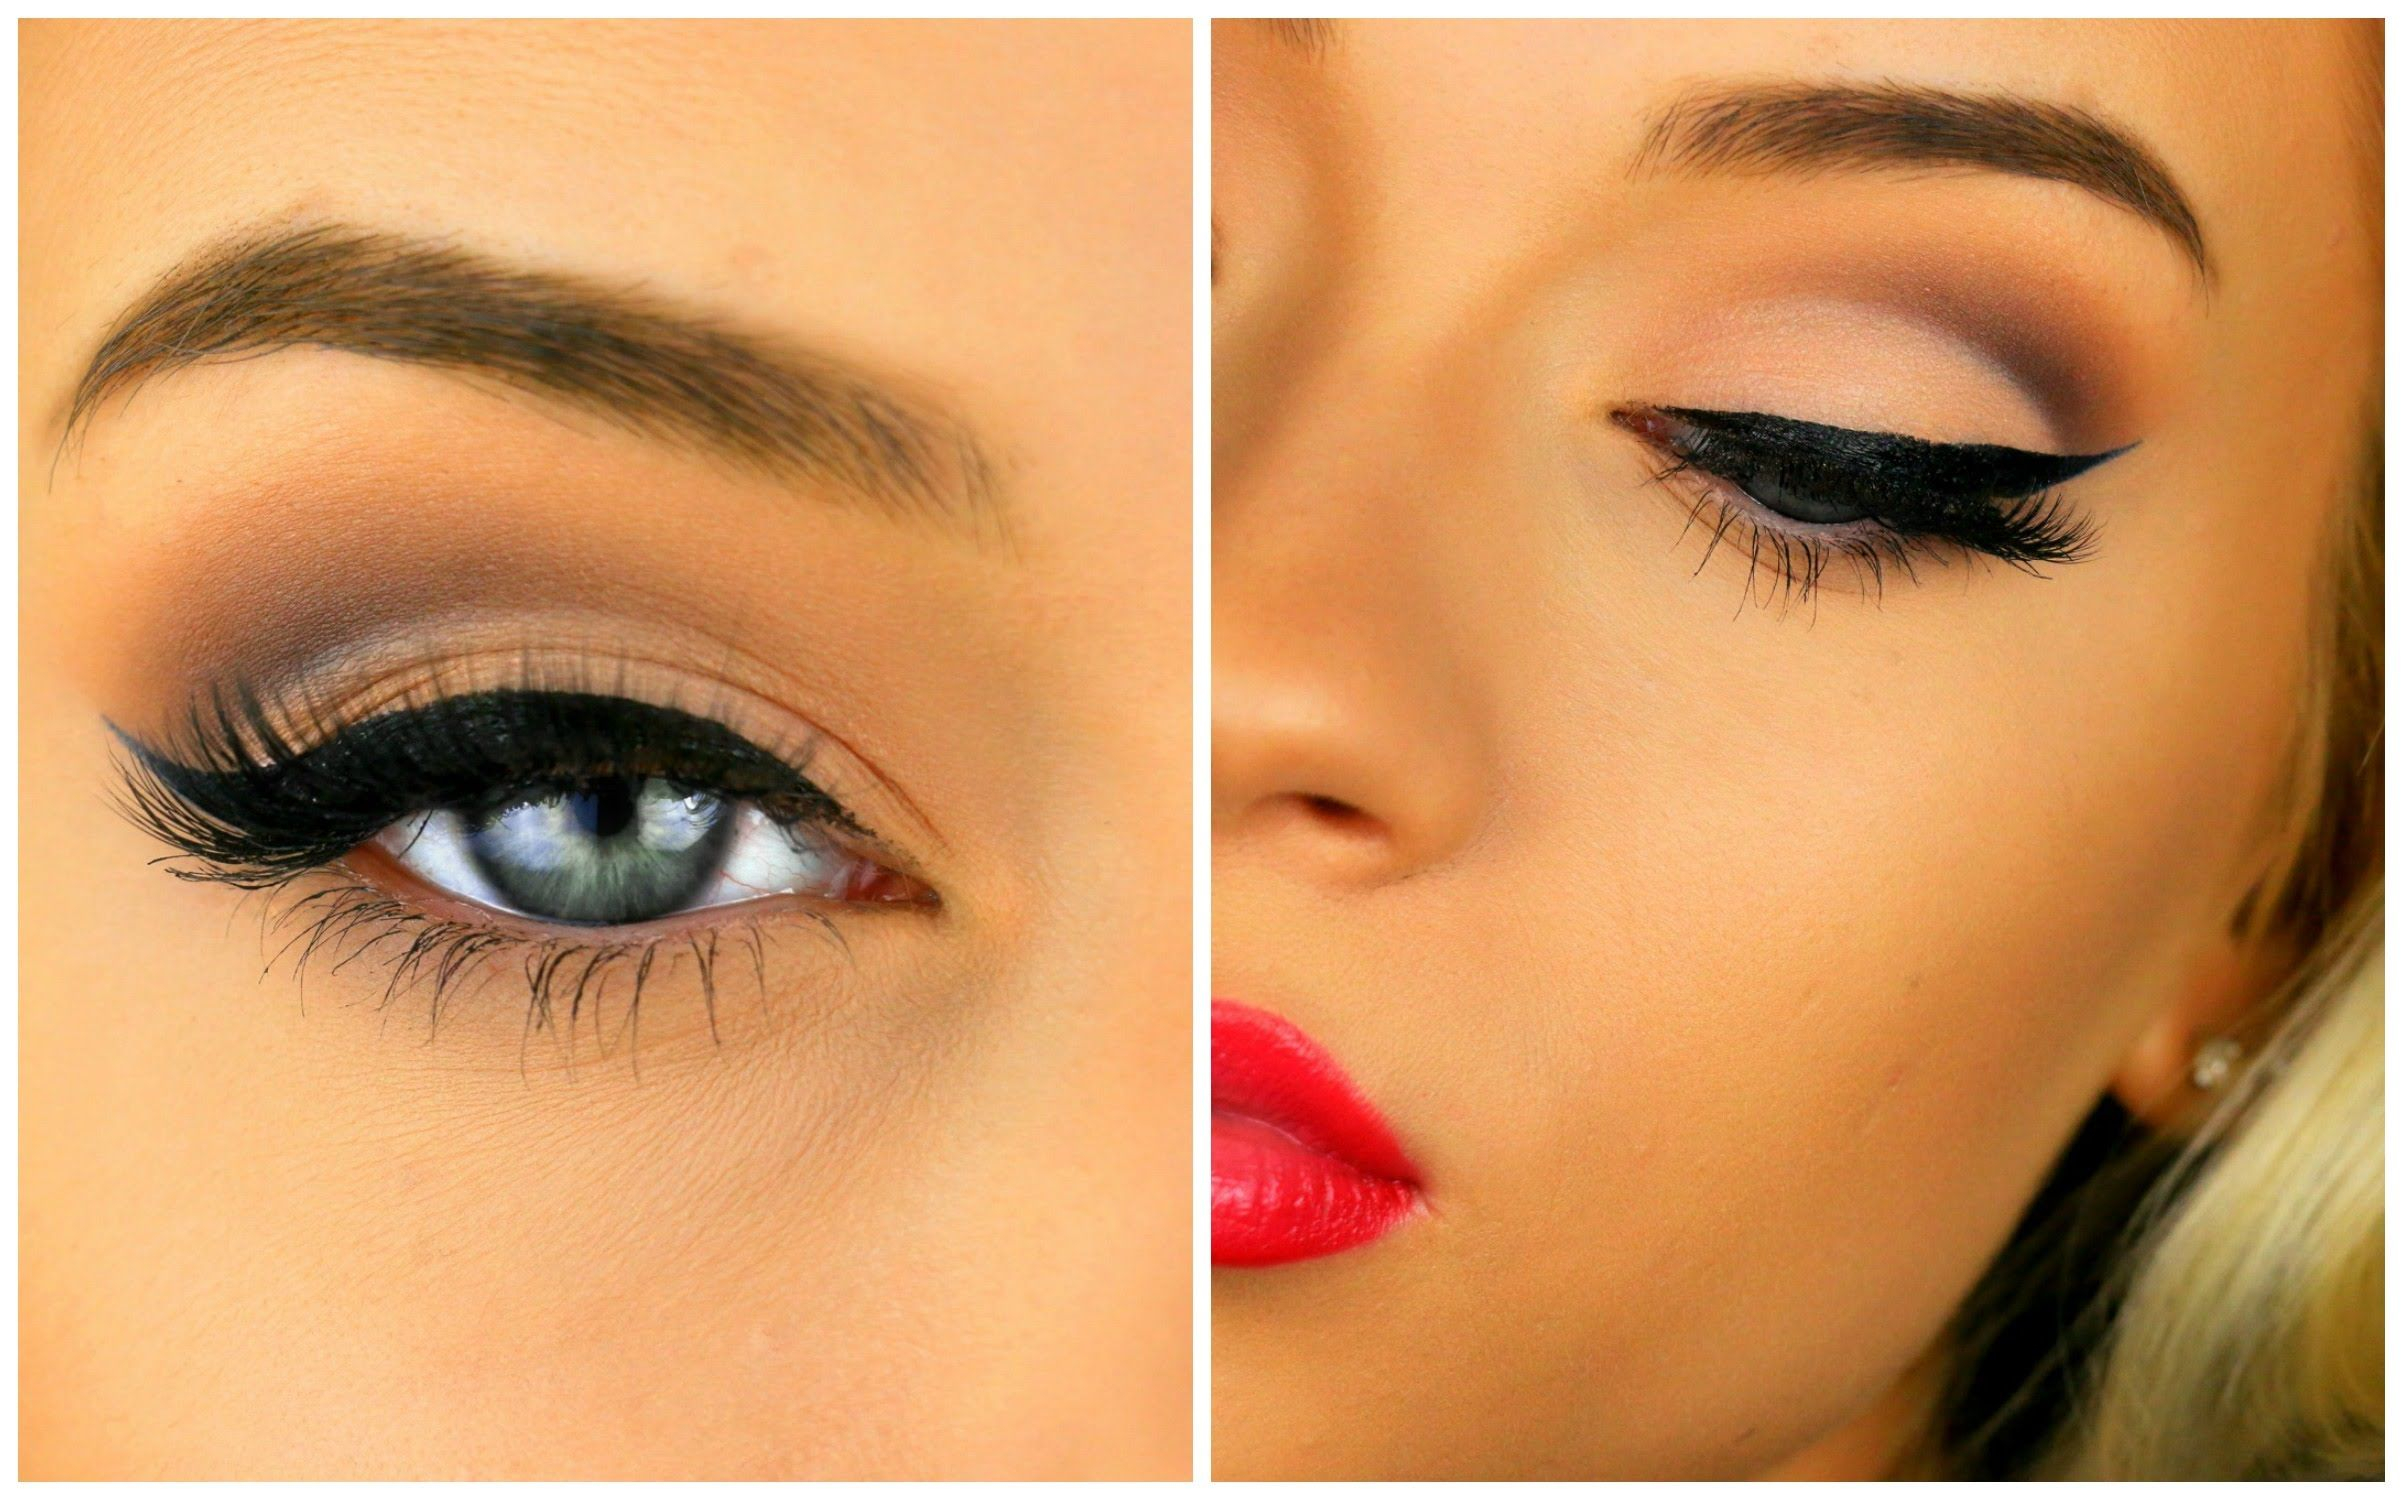 Makeup Hooded Eyes 6 Tips To Applying Eyeshadow For Hooded Eyelids That You Probably